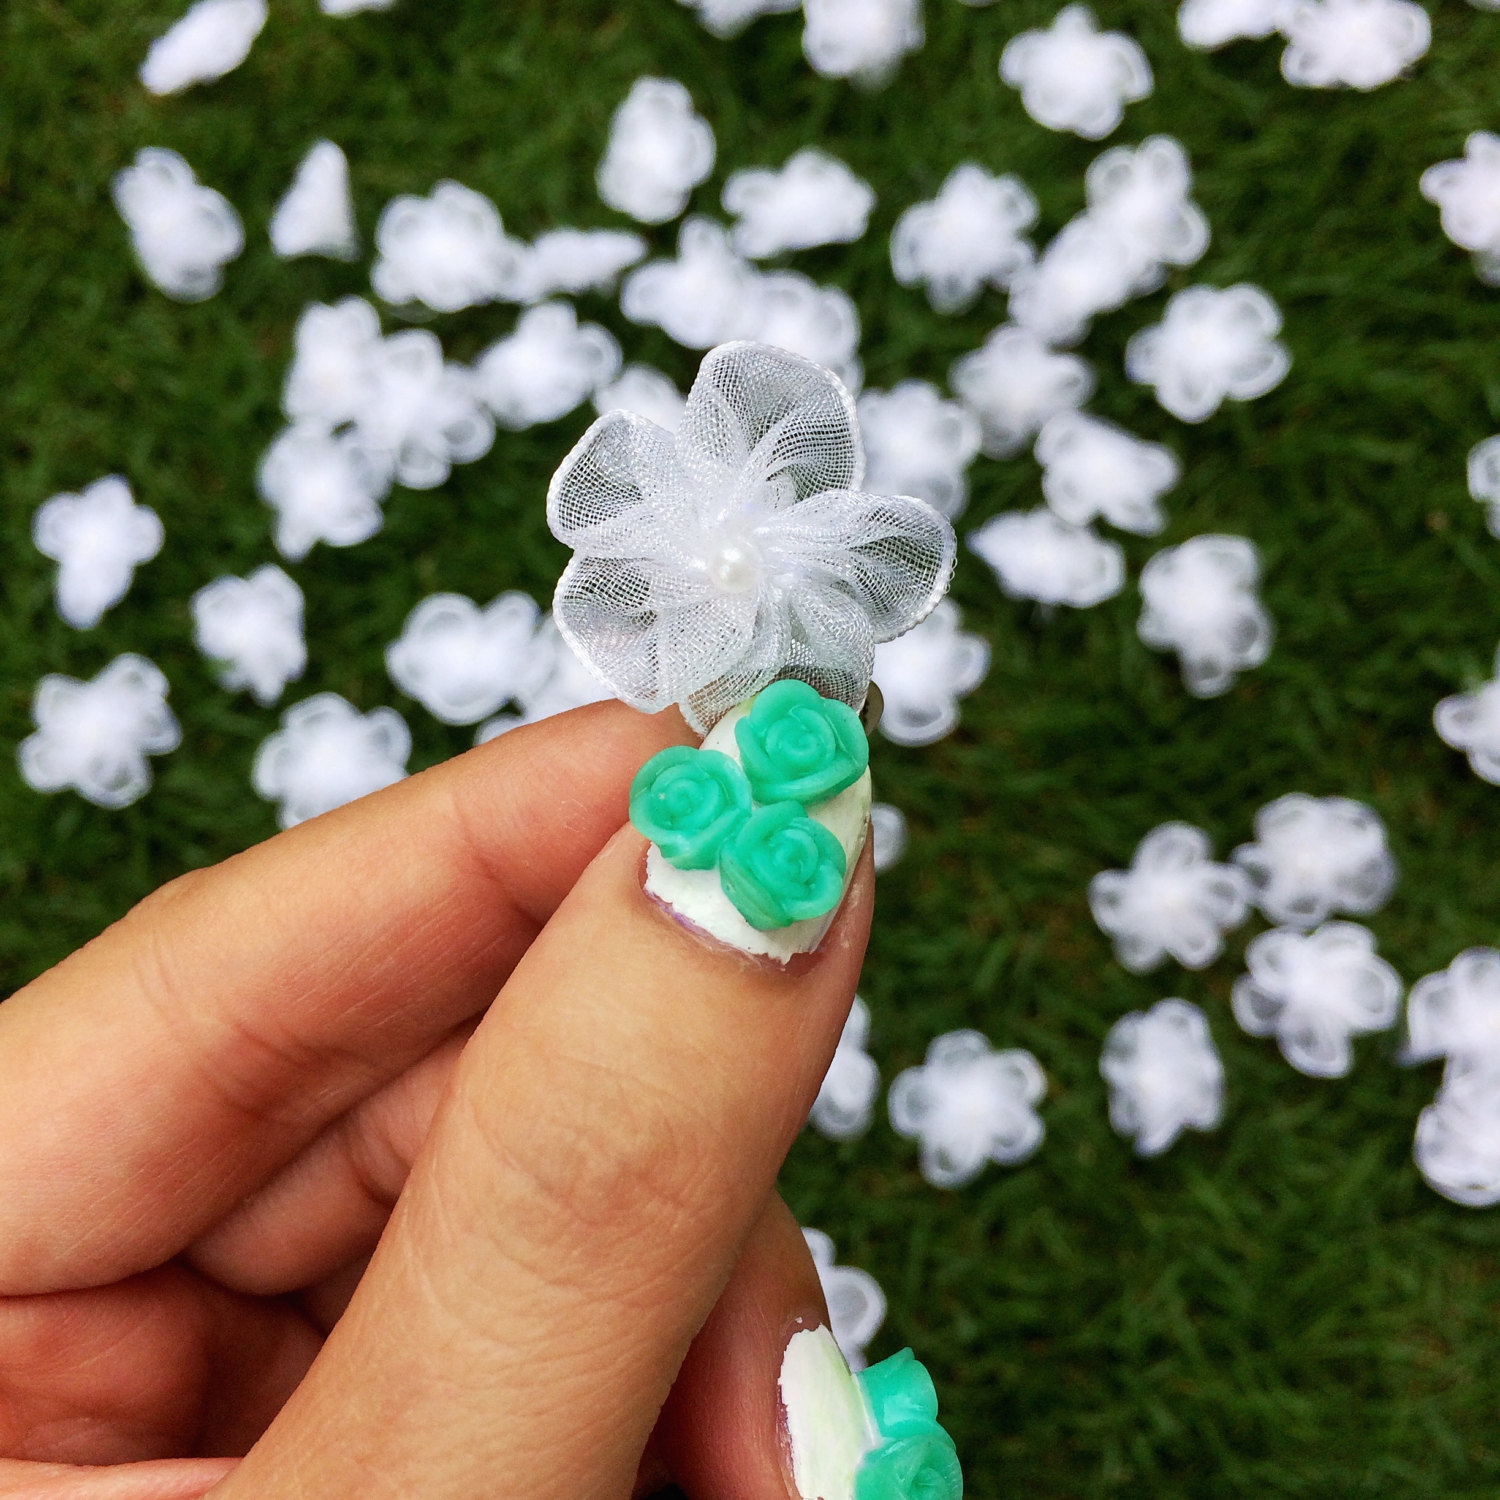 20 White Beaded Flowers,Chiffon Flowers,Ribbon Flowers,Sewing Applique,Craft DIY - $4.49